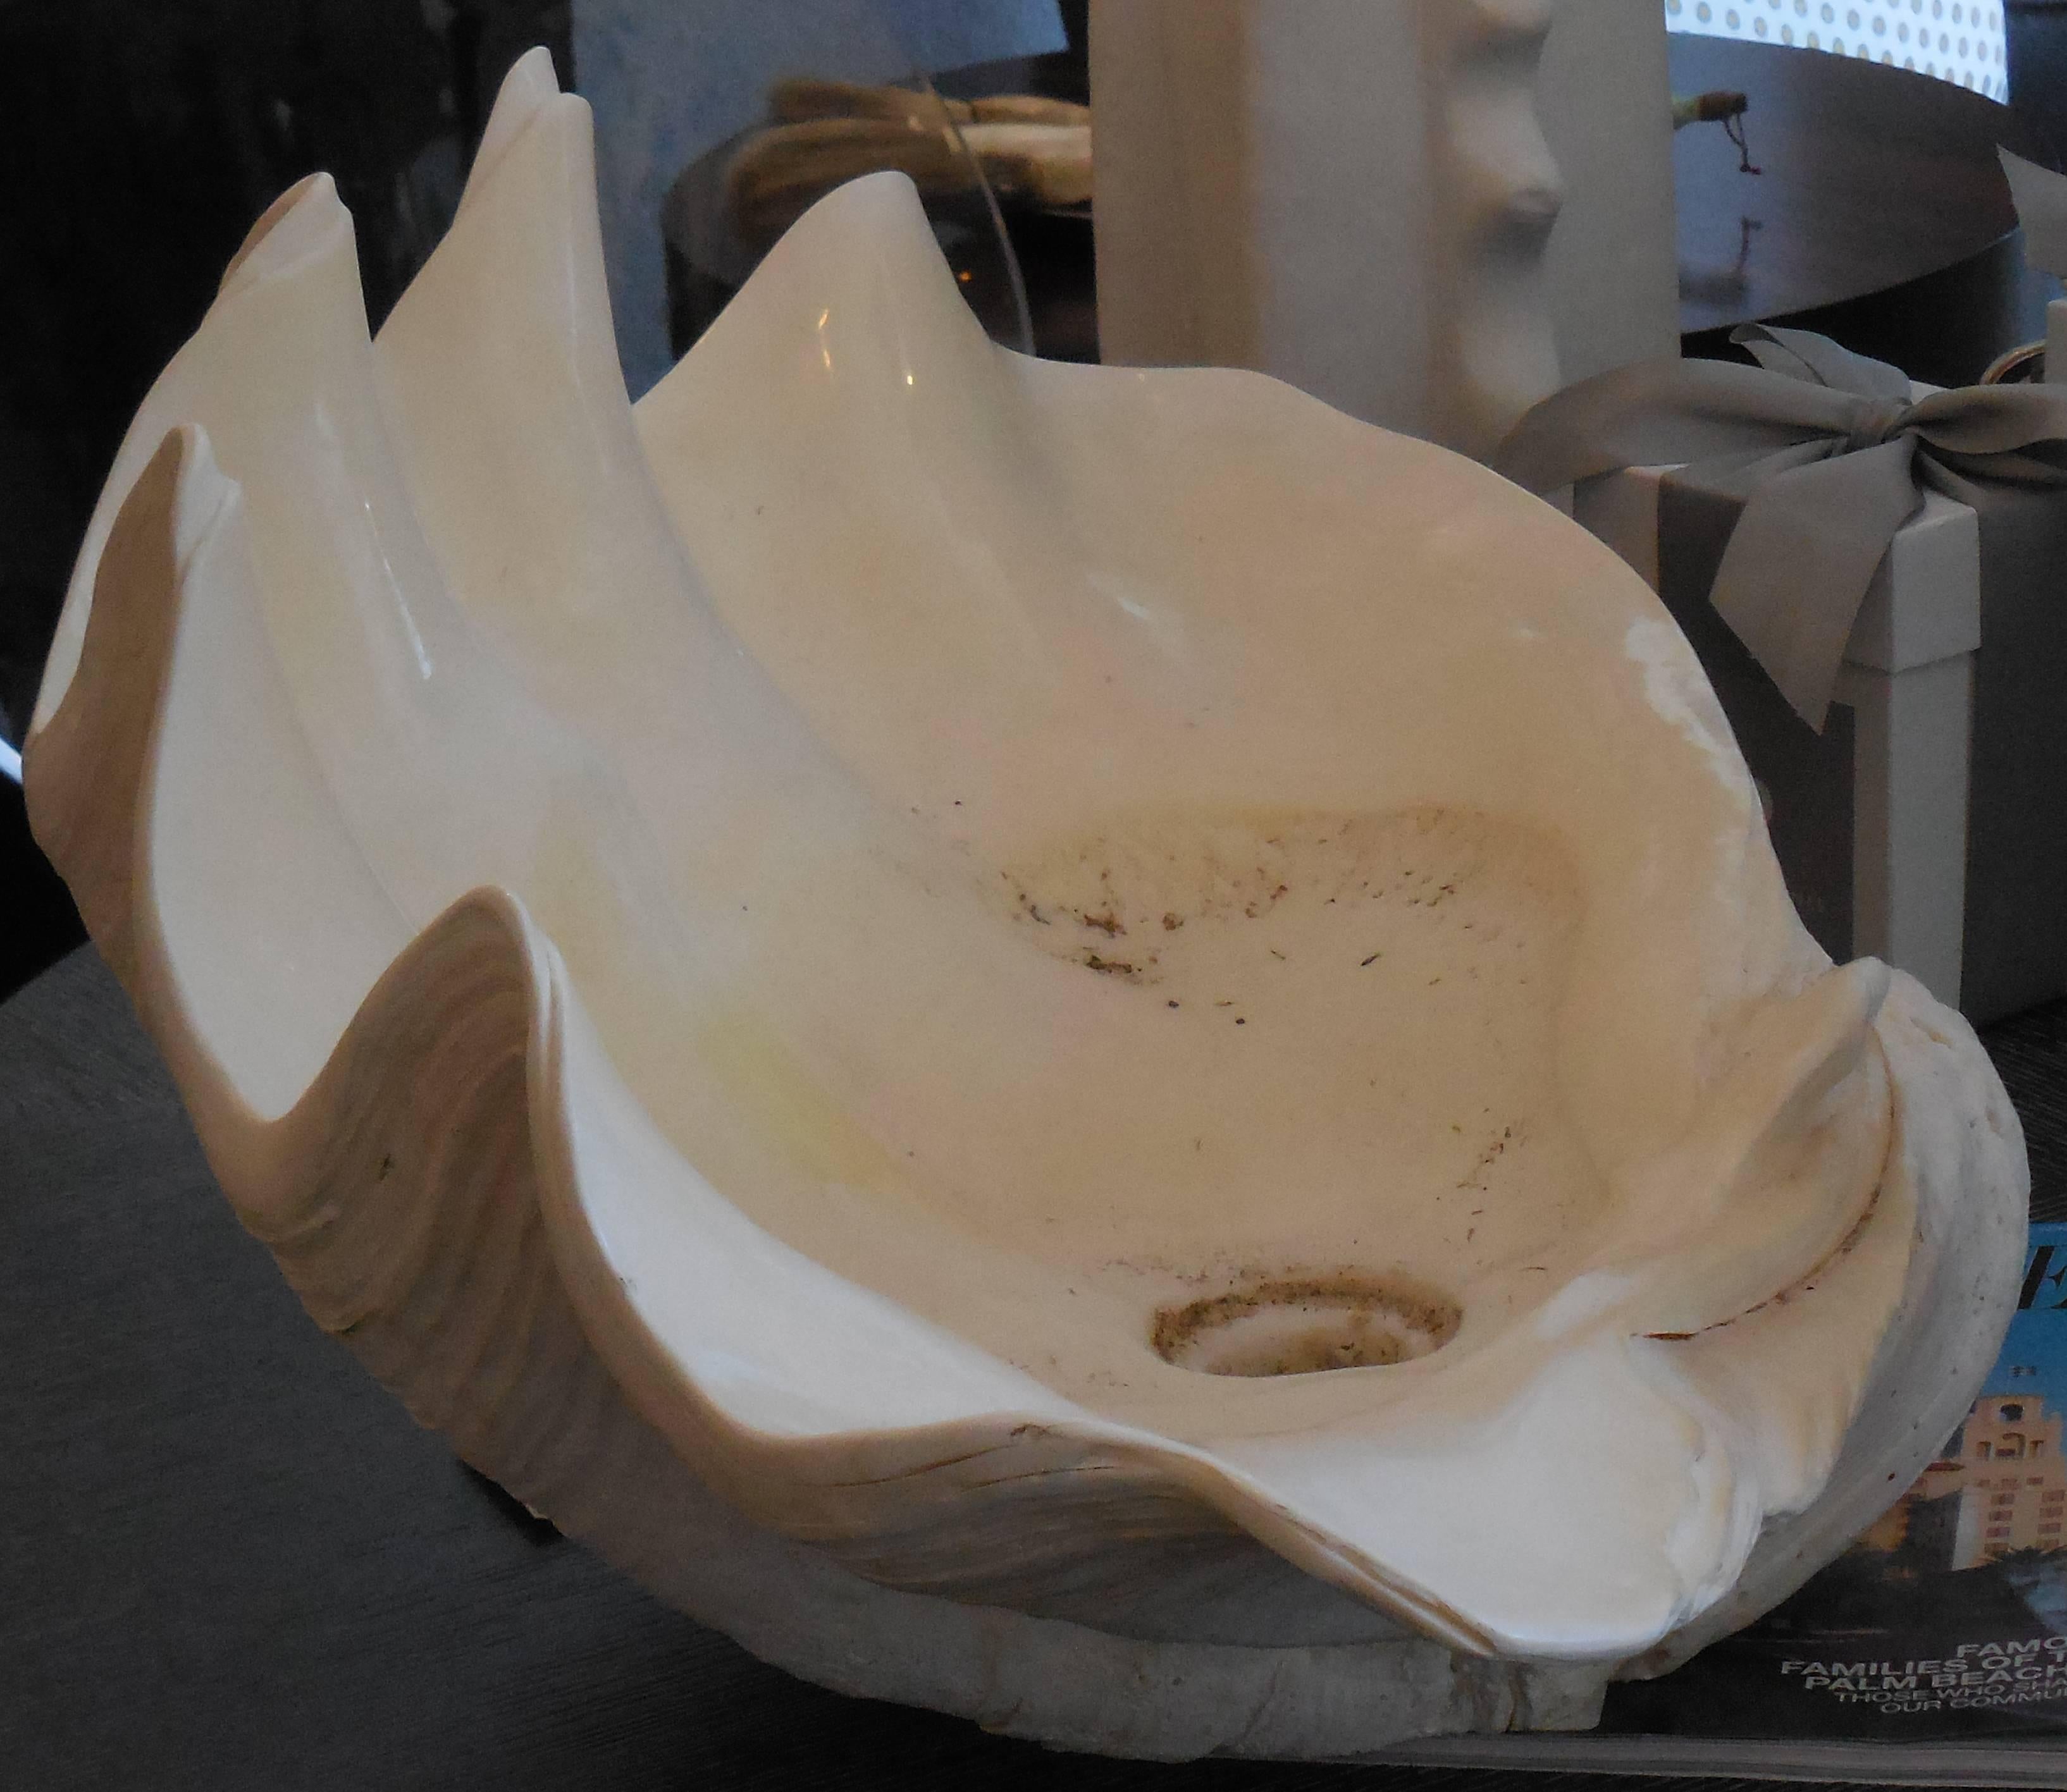 Large elegant natural clam shell customized and modified to use as a sink. It was used in big estate in Palm Beach, Fl.
One-of-a-kind piece.